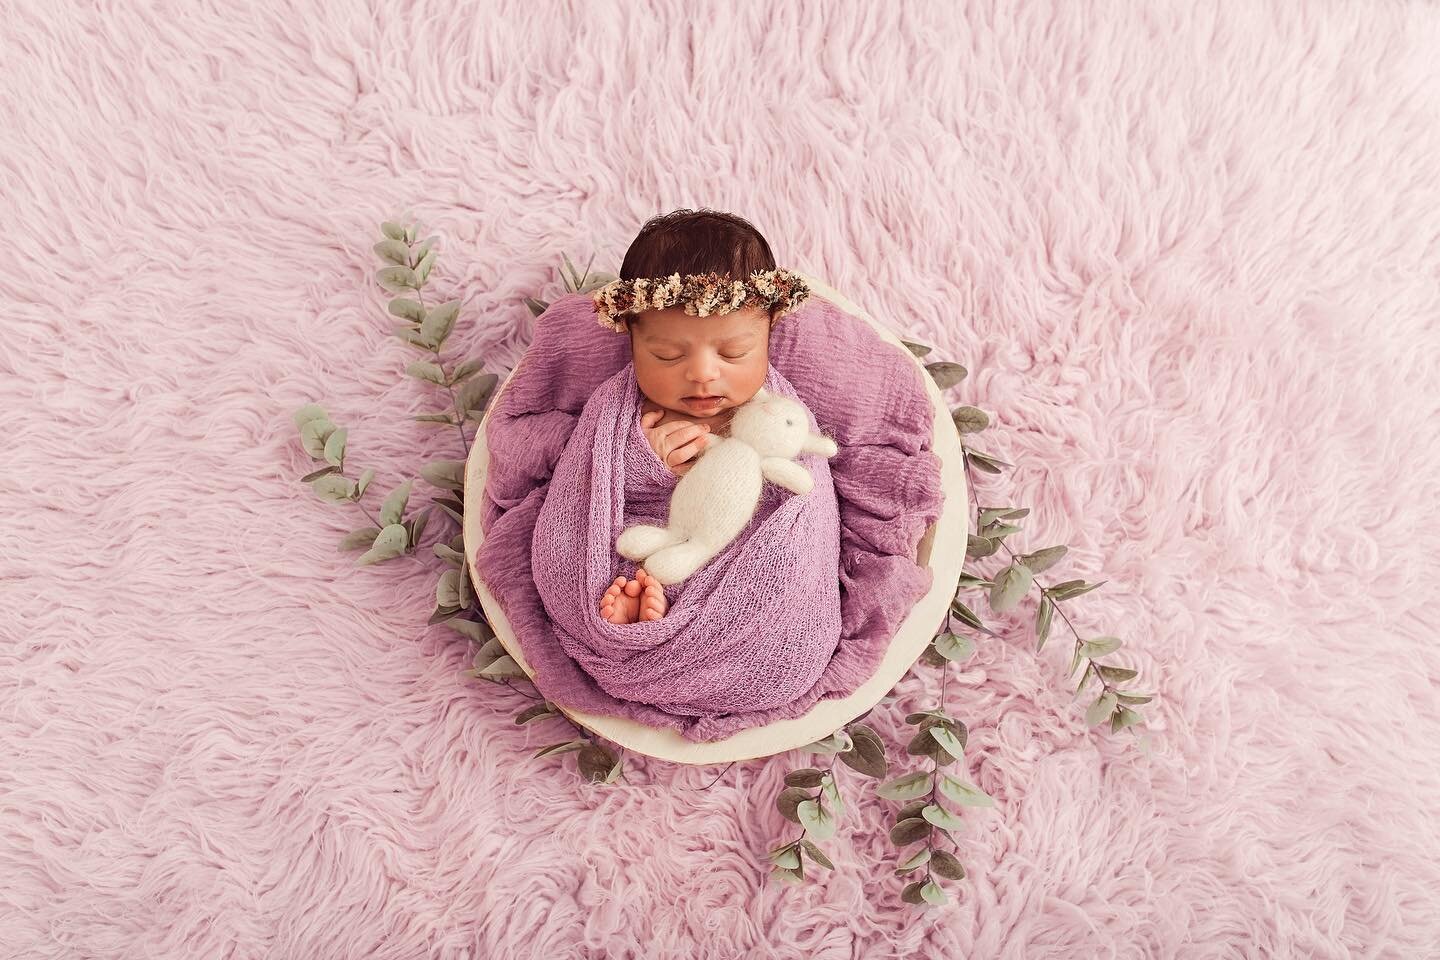 When your baby is born I send out an email with details on how to prepare for your session. I also ask which colours, poses and props you would like me to focus on for your session. This beautiful little lady looked gorgeous in lilac 😍

What do you 